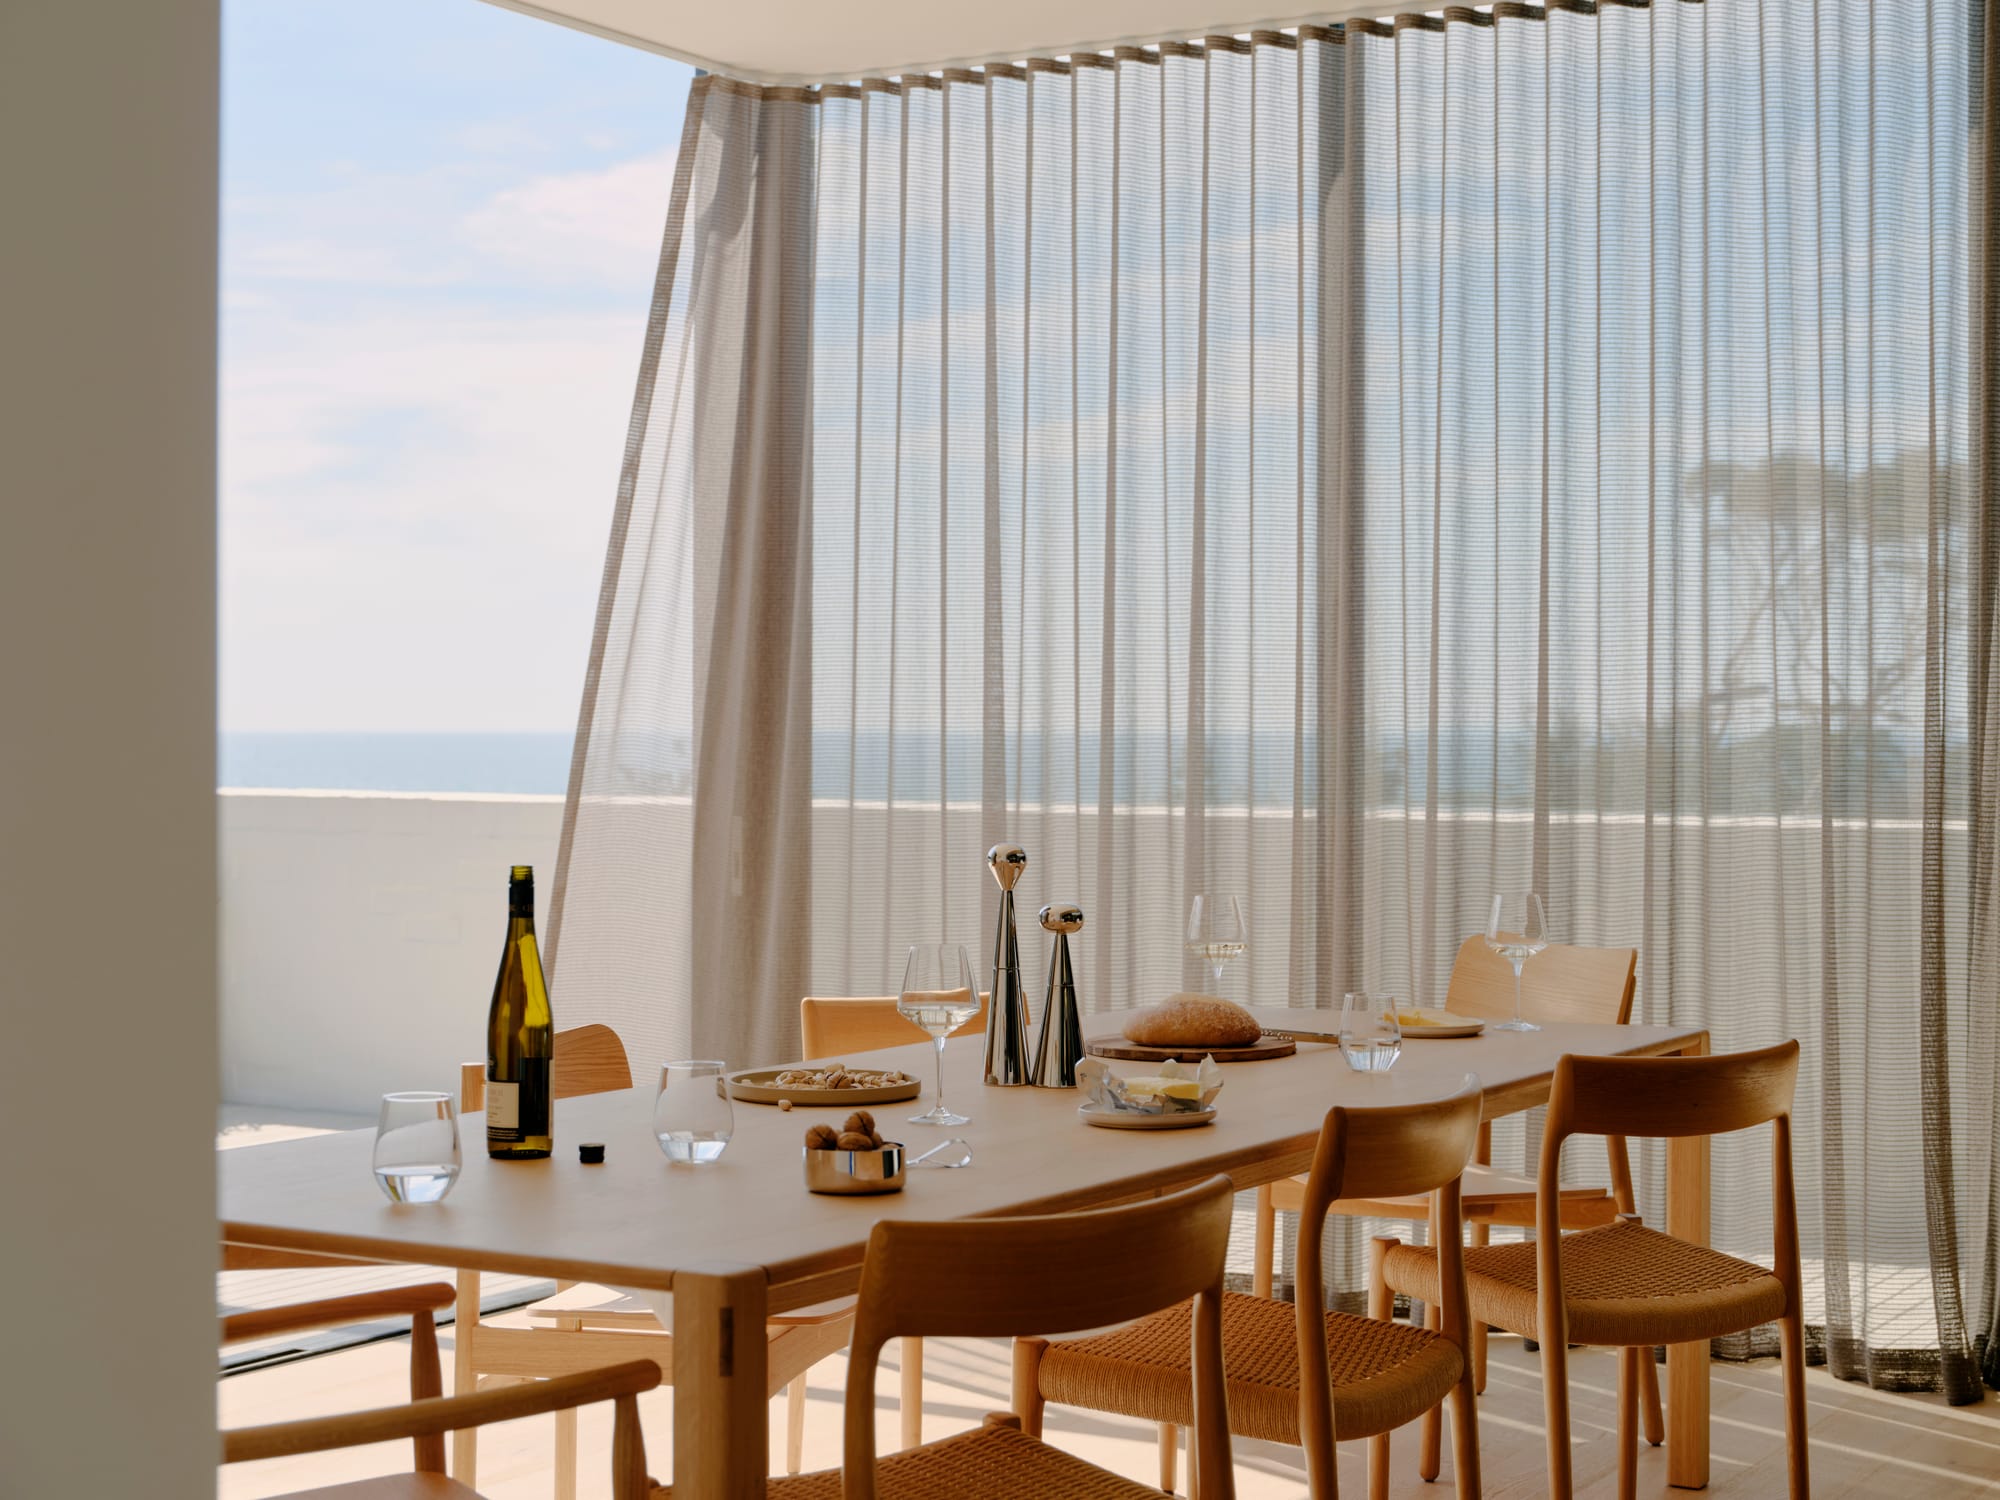 Courtside House by Tom Robertson Architects. Photography by Tom Ross. Dining room with floor-to-ceiling windows overlooking the ocean. Semi-transparent curtains blow in breeze behind minimalistic timber dining table and chairs. 